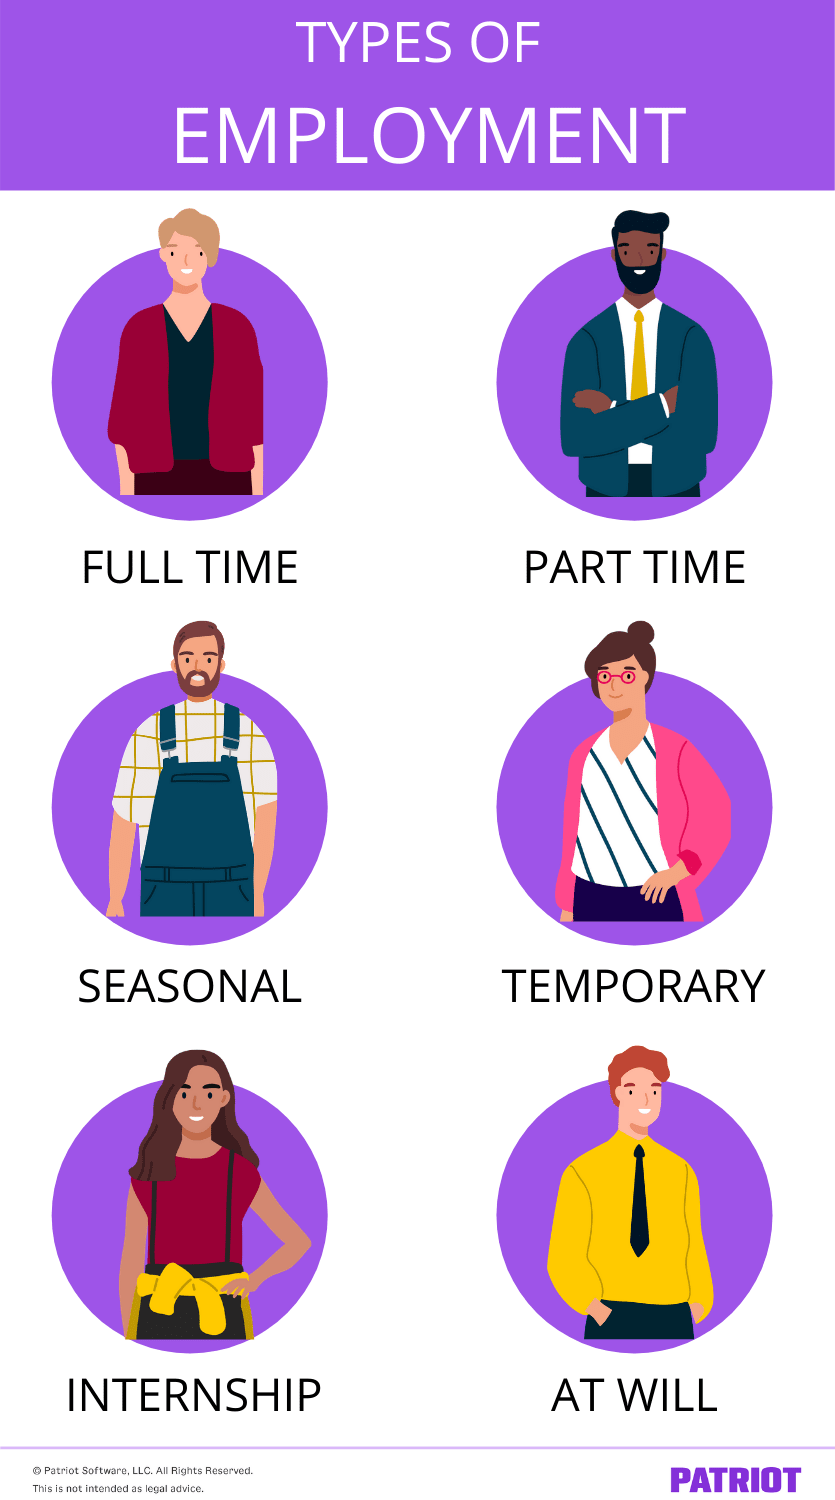 6 different types of employment with illustrations for each